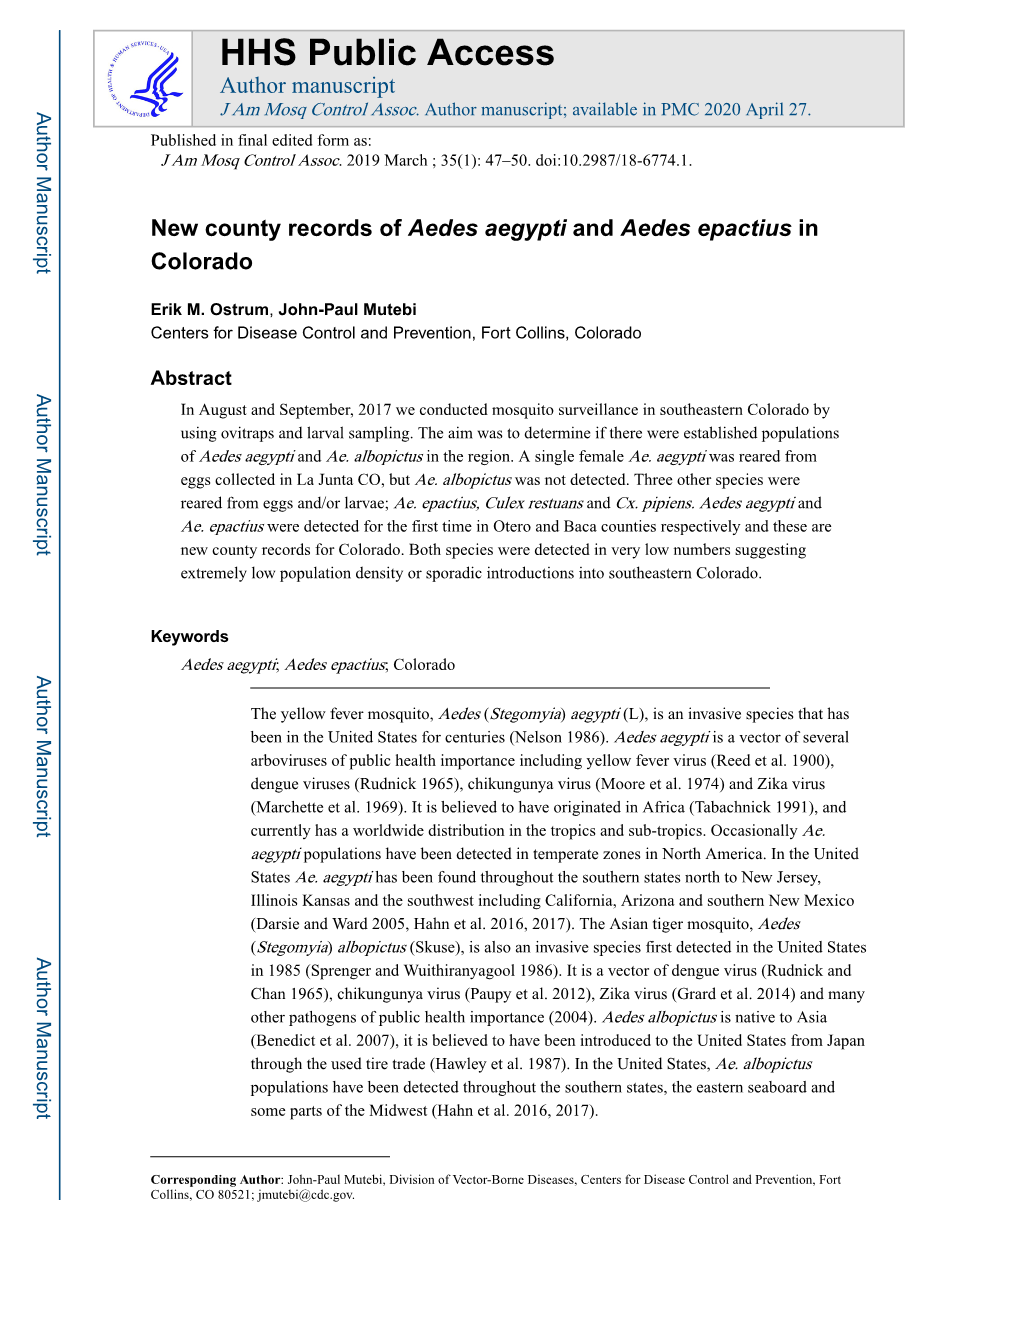 New County Records of Aedes Aegypti and Aedes Epactius in Colorado